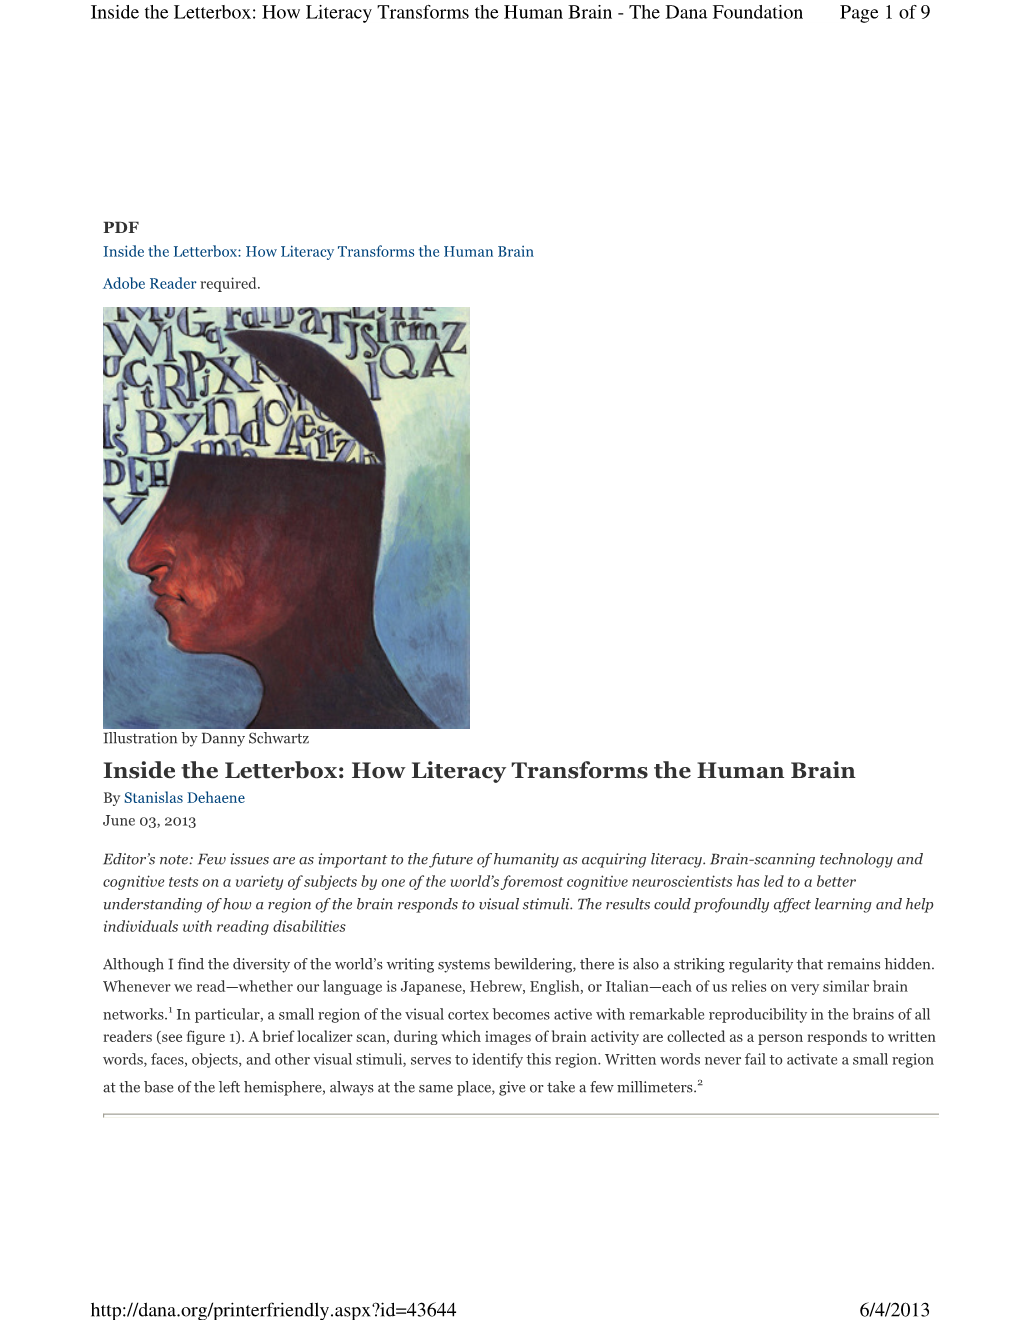 Inside the Letterbox: How Literacy Transforms the Human Brain - the Dana Foundation Page 1 of 9